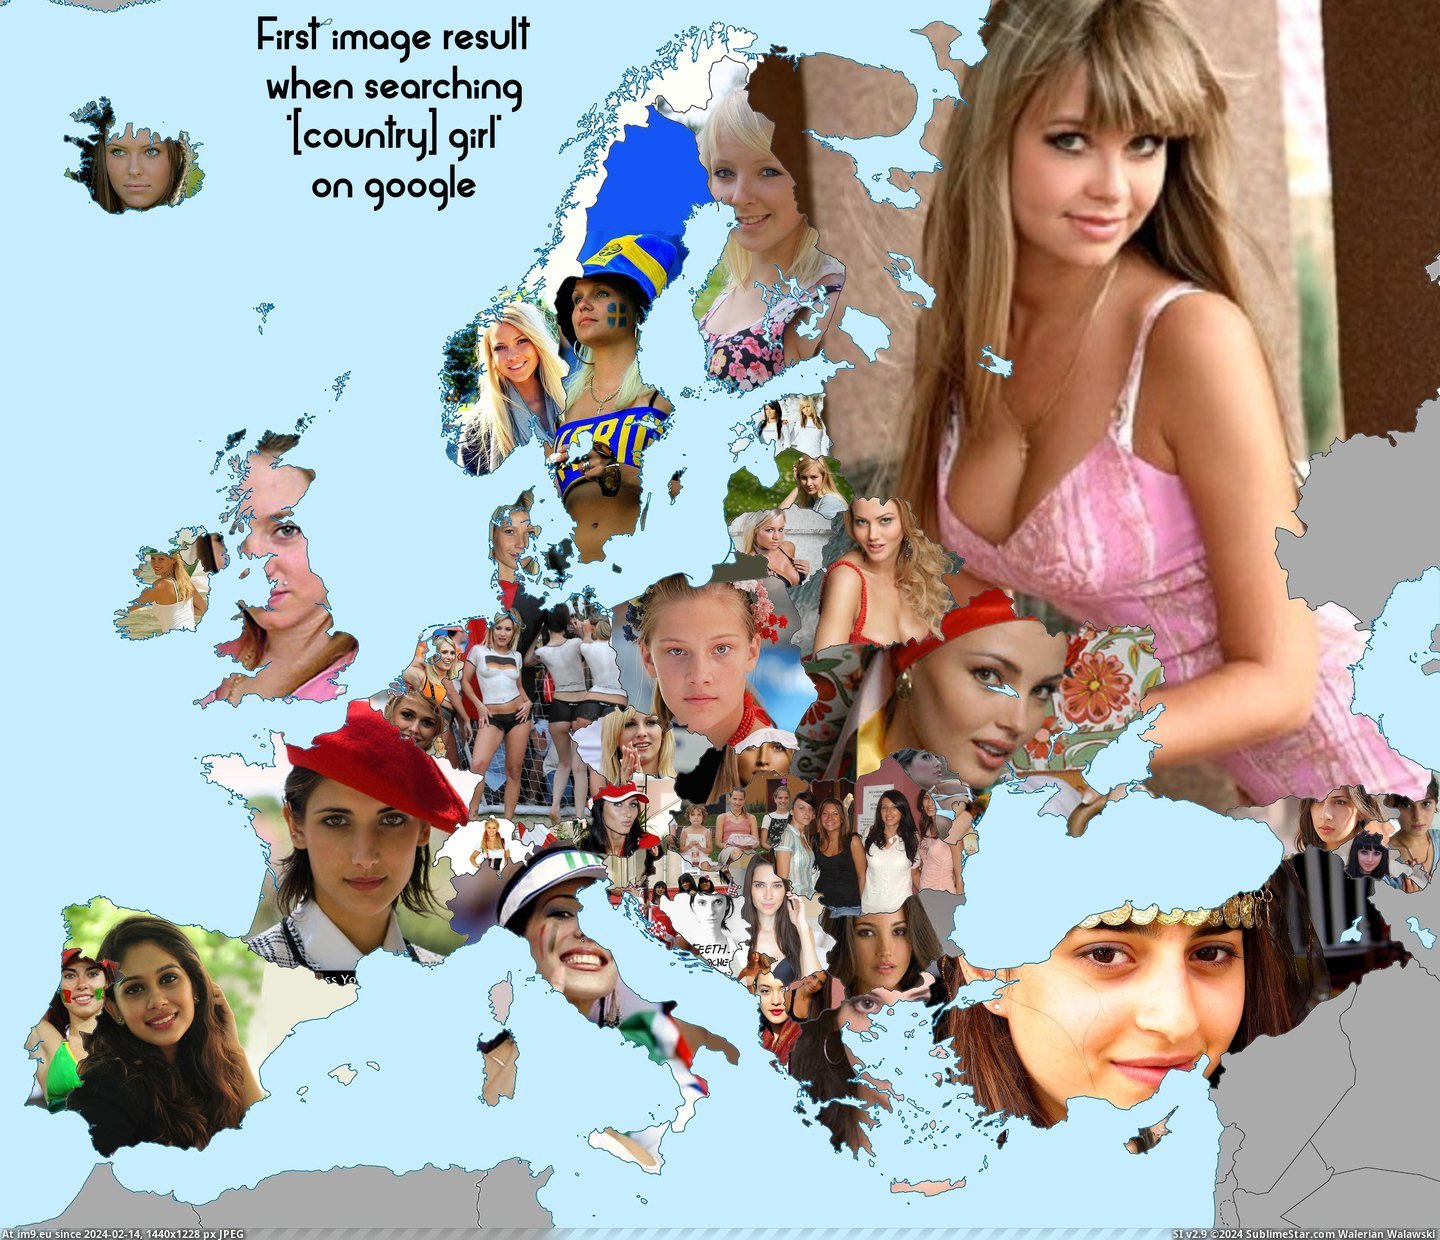 #Image #Girl #Country #Result #Searching #Map #Europe [Mapporn] Europe map with the first image result when searching '[country] girl]' [OC] [5000x4275] Pic. (Obraz z album My r/MAPS favs))